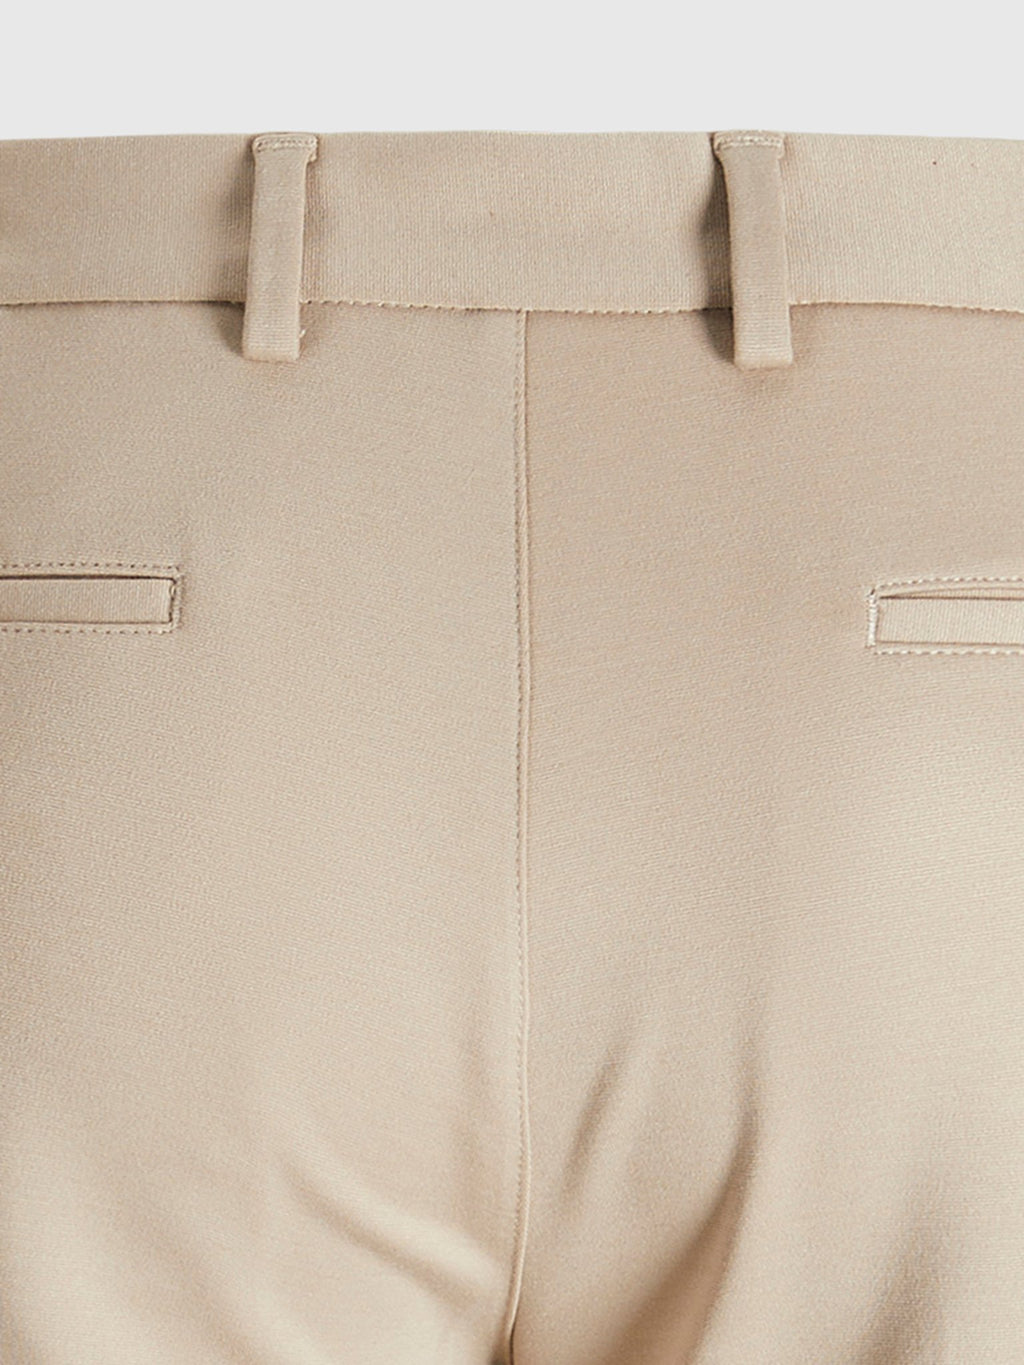 The Original Performance Pants - gaineamh